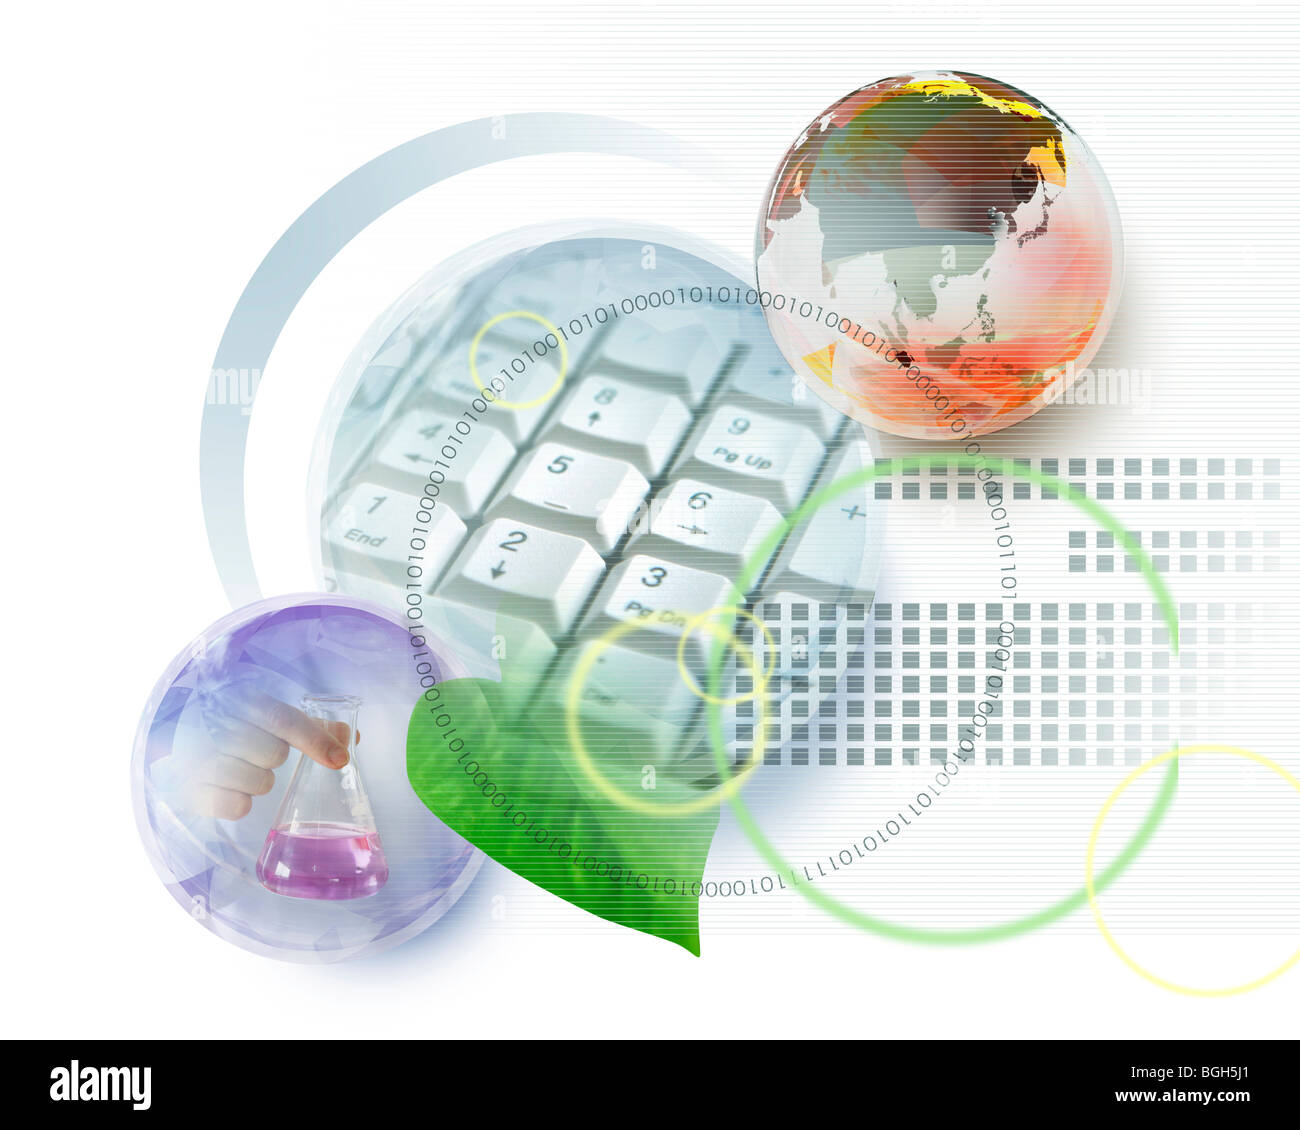 Composite with man holing a beaker, computer keyboard and binary codes Stock Photo